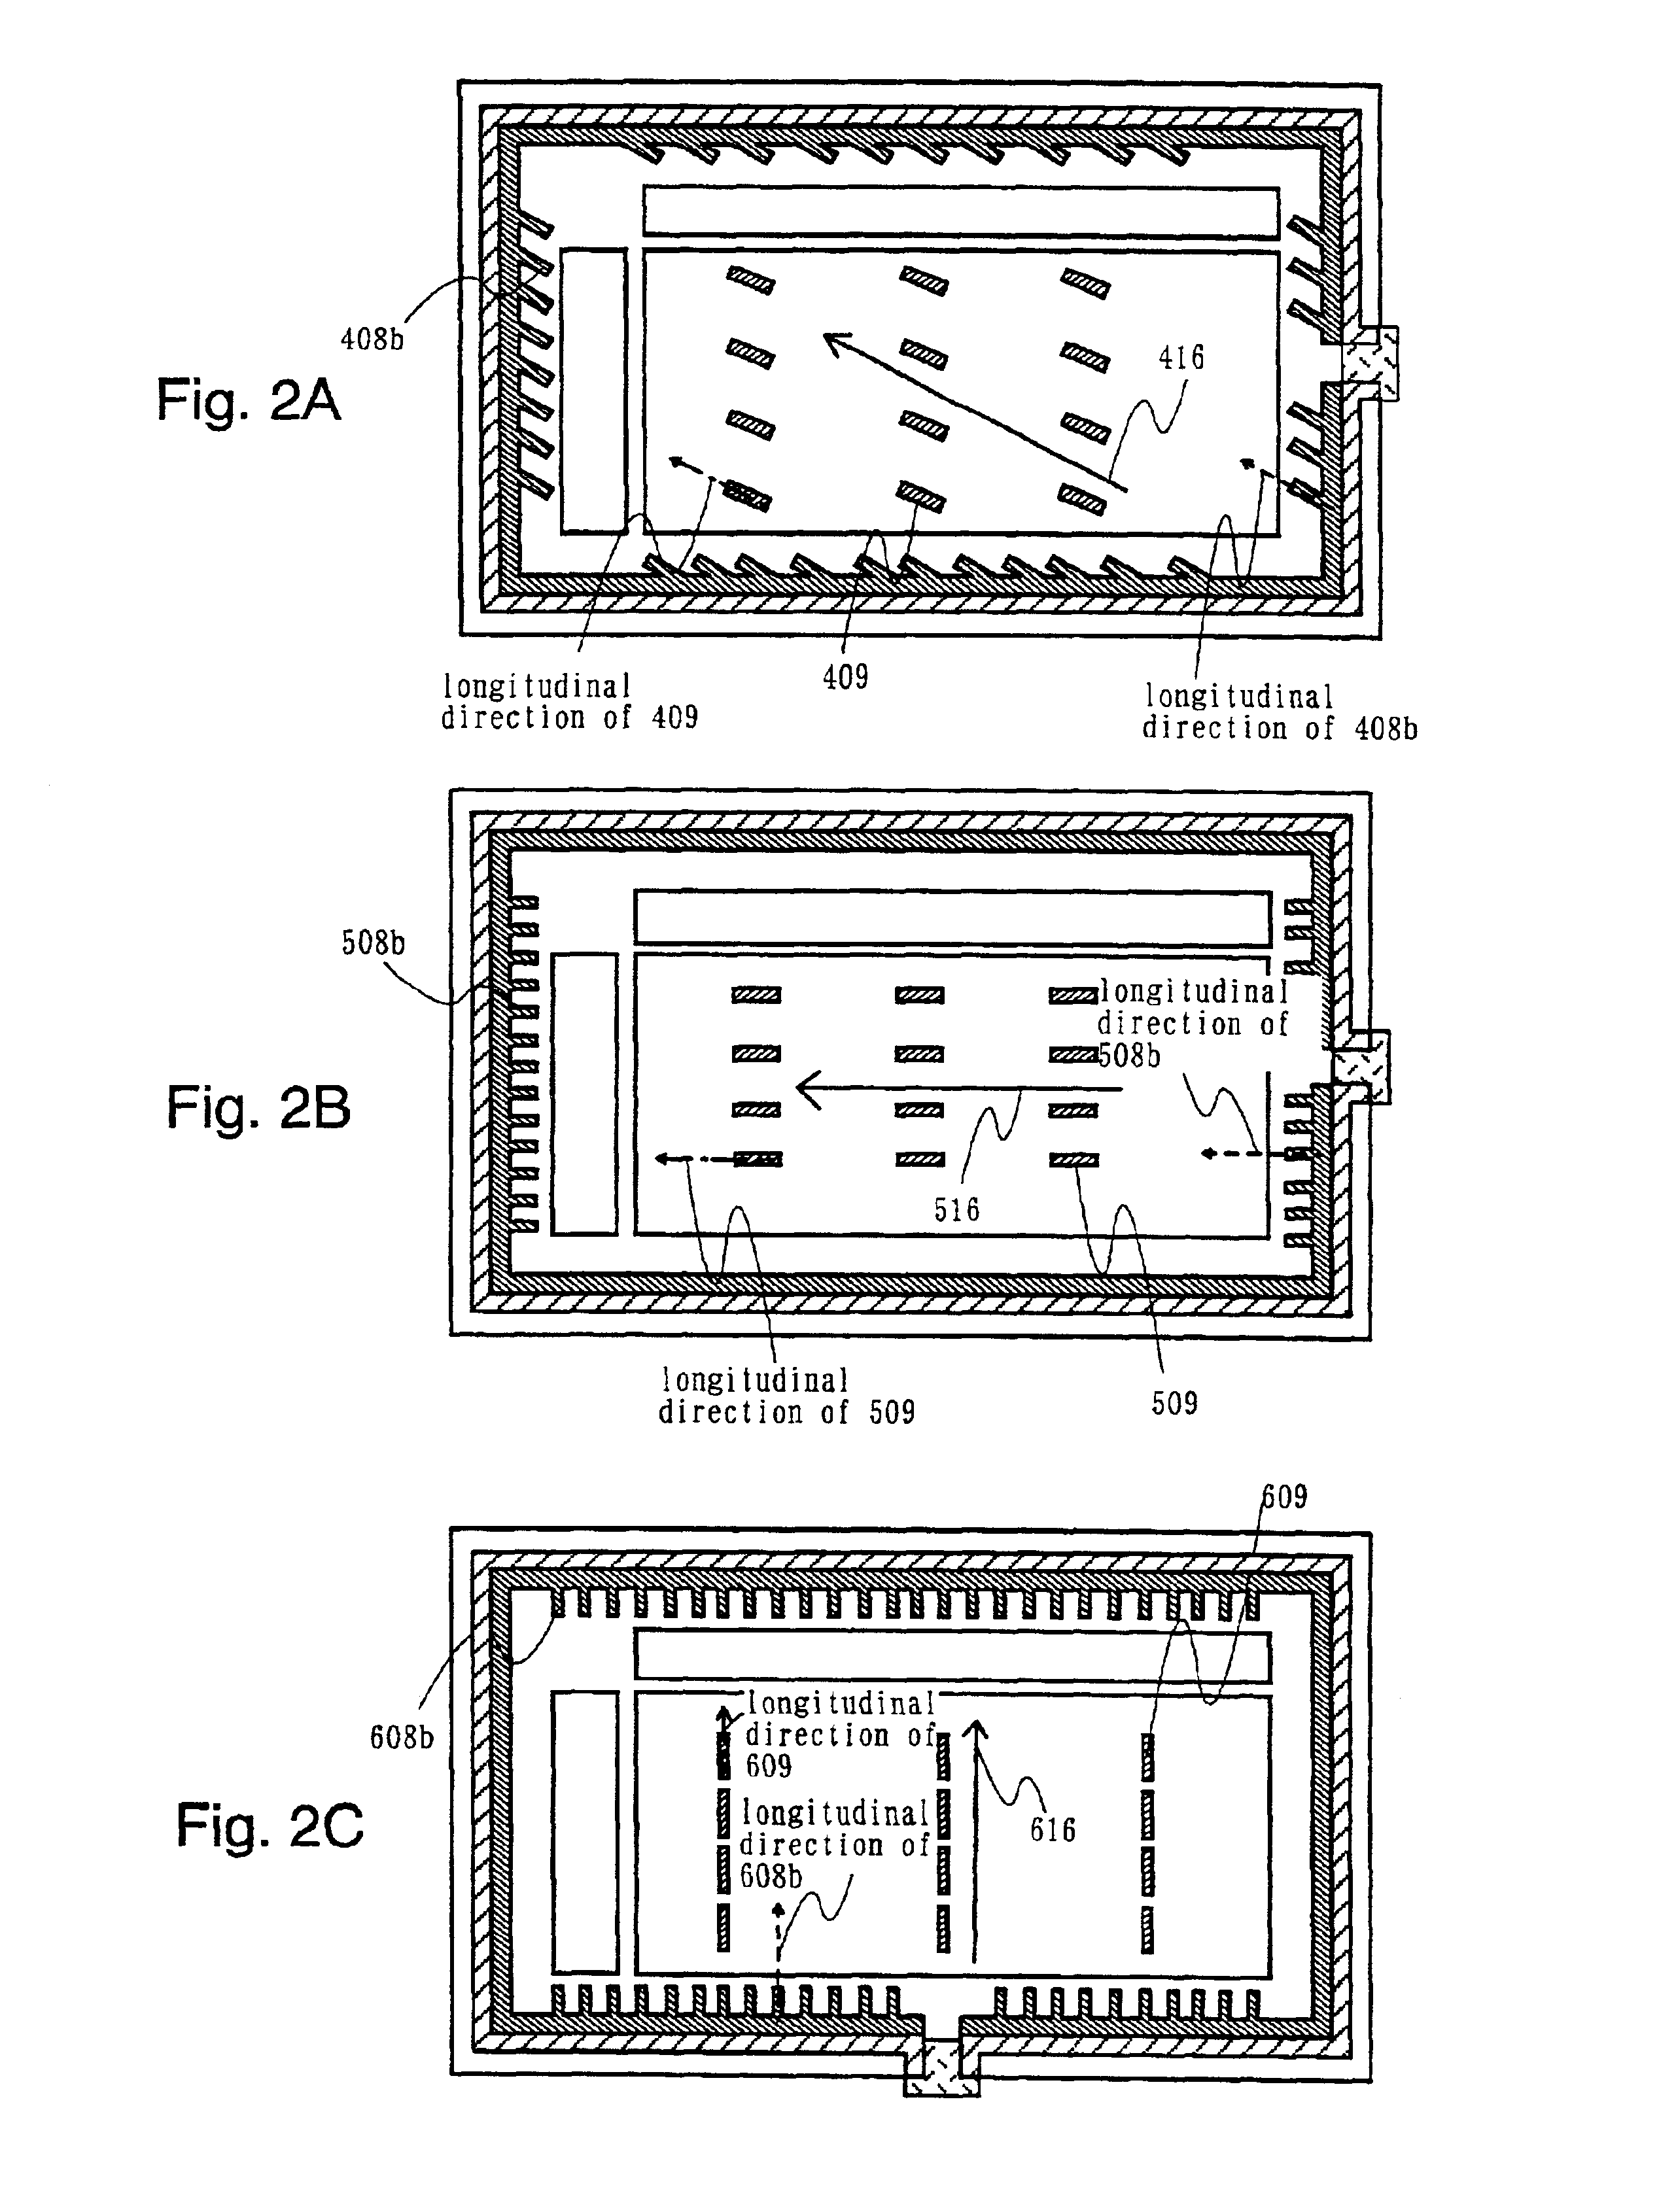 Liquid crystal display device, and method of manufacturing the same